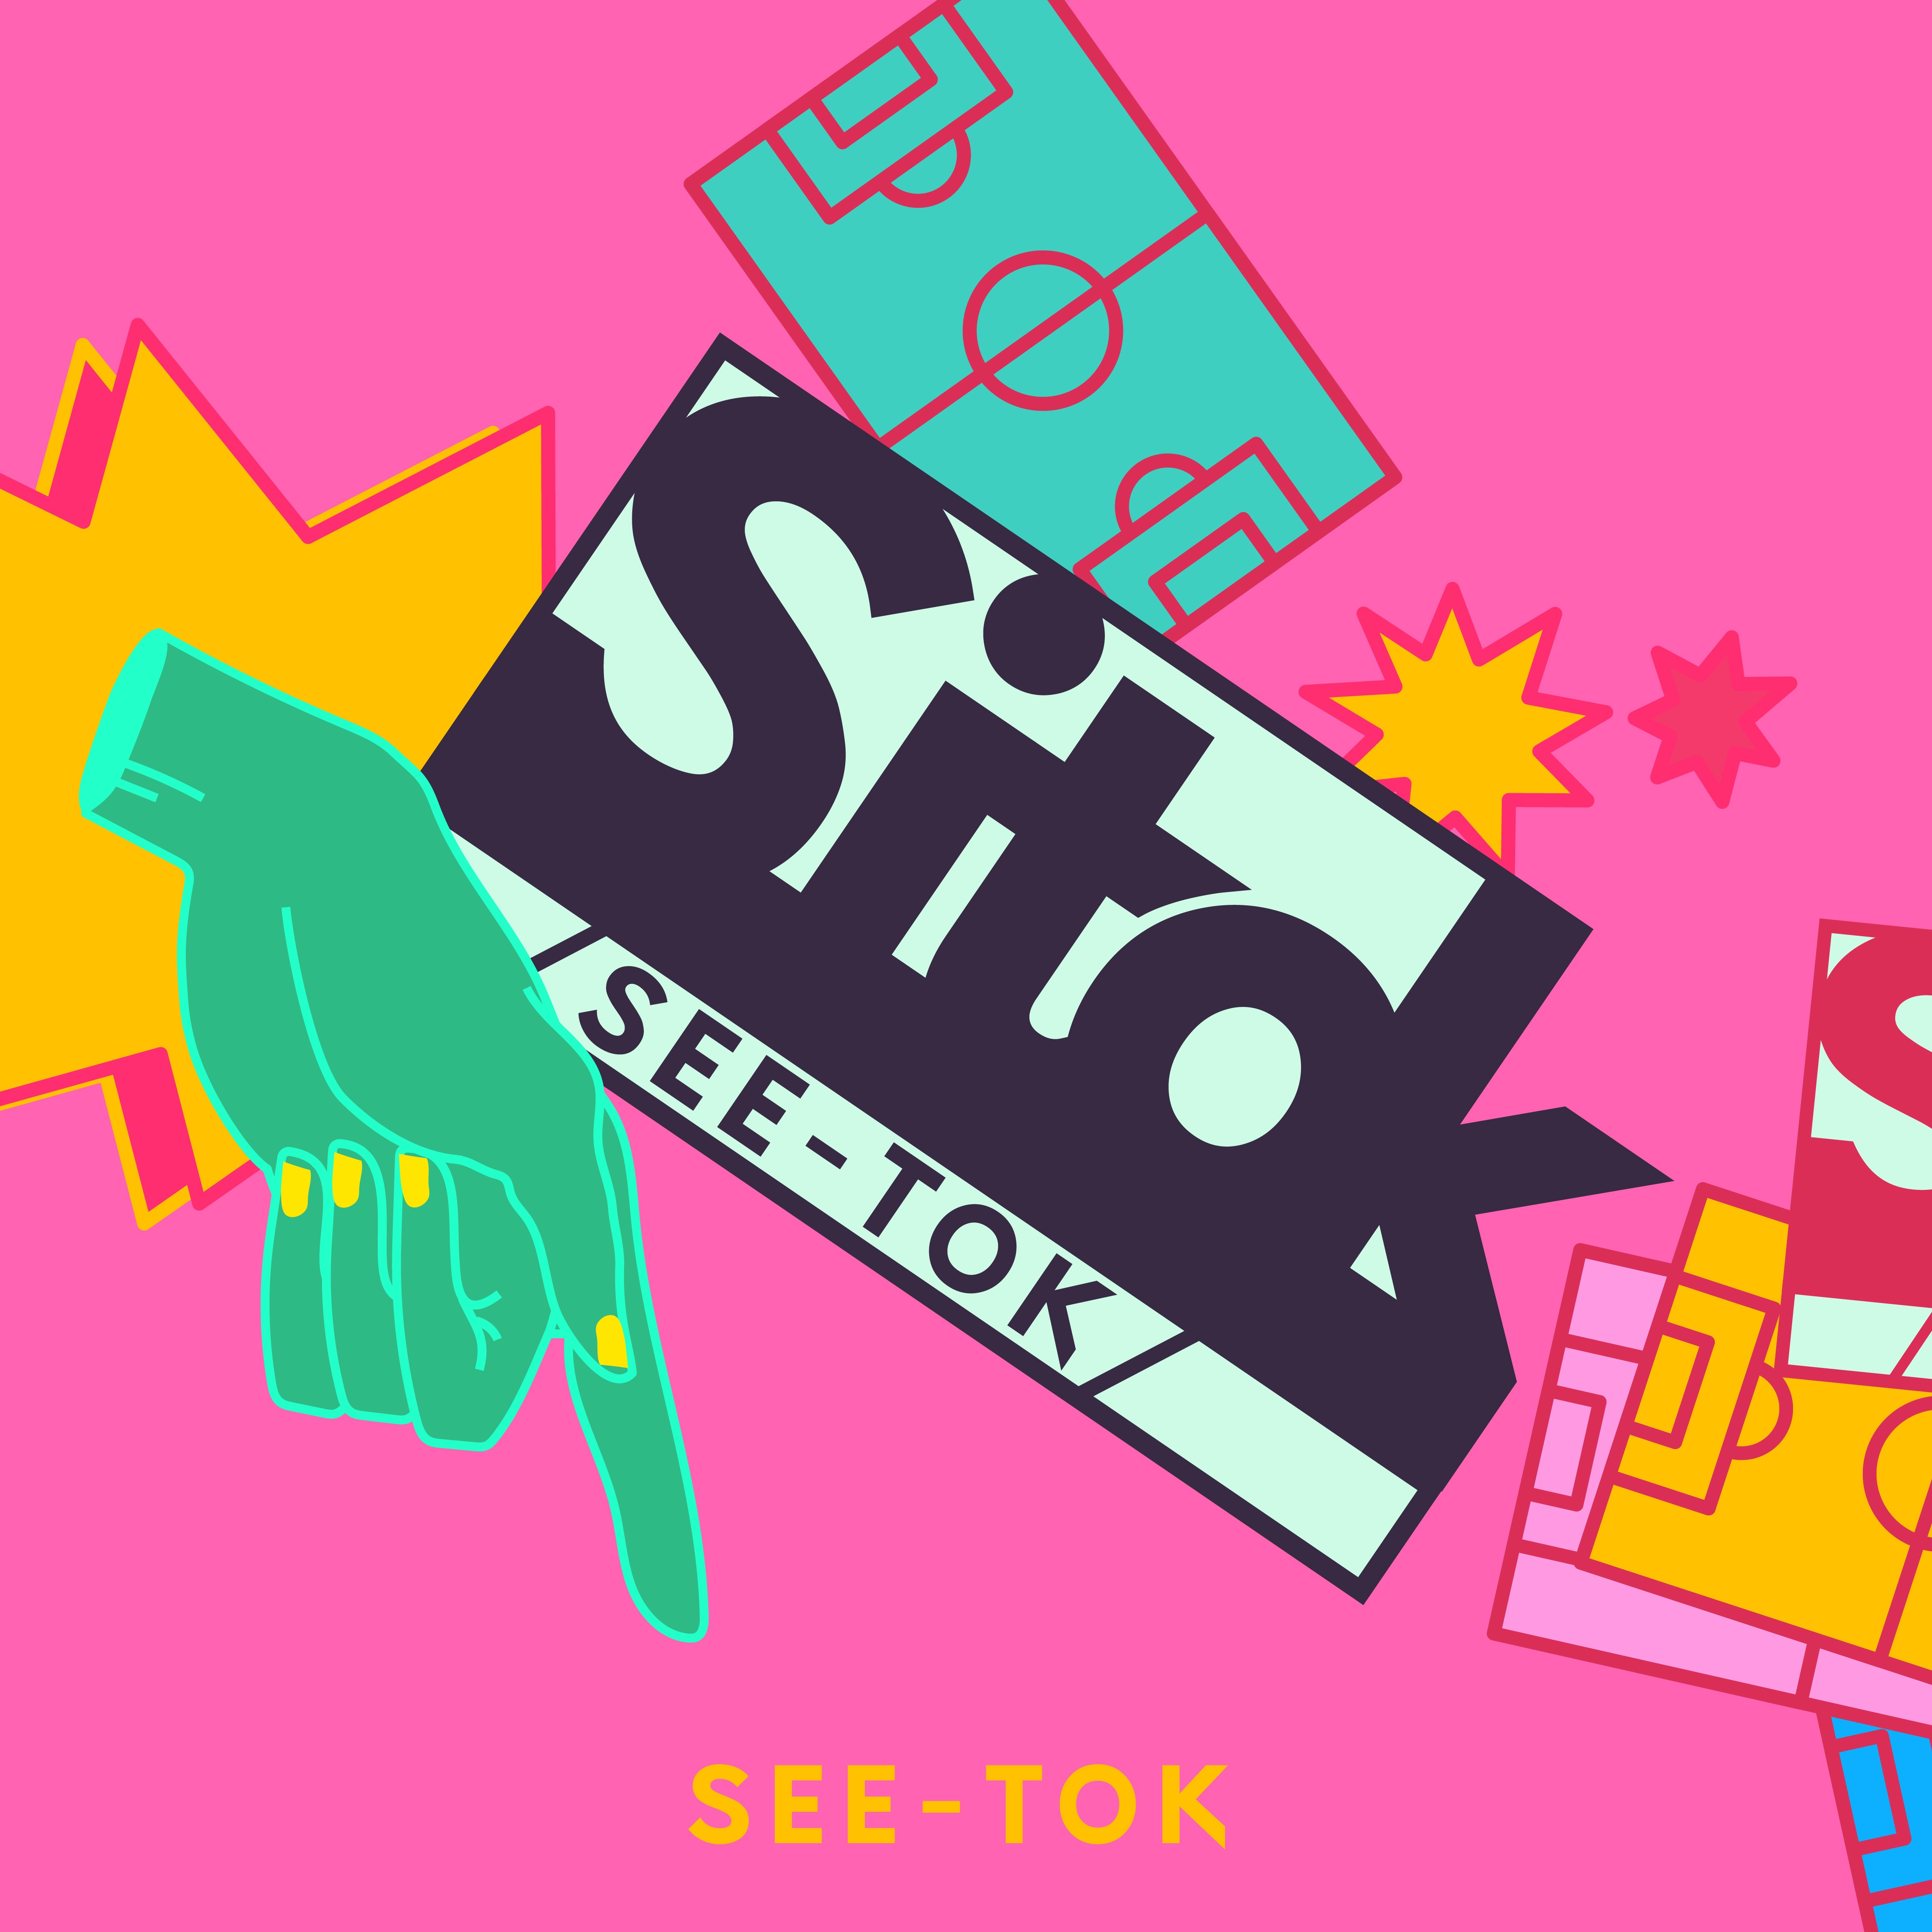 MySlangBank’s artwork for the post on the Sarawak slang word ‘sitok’, which means here. Illustration: MySlangBank